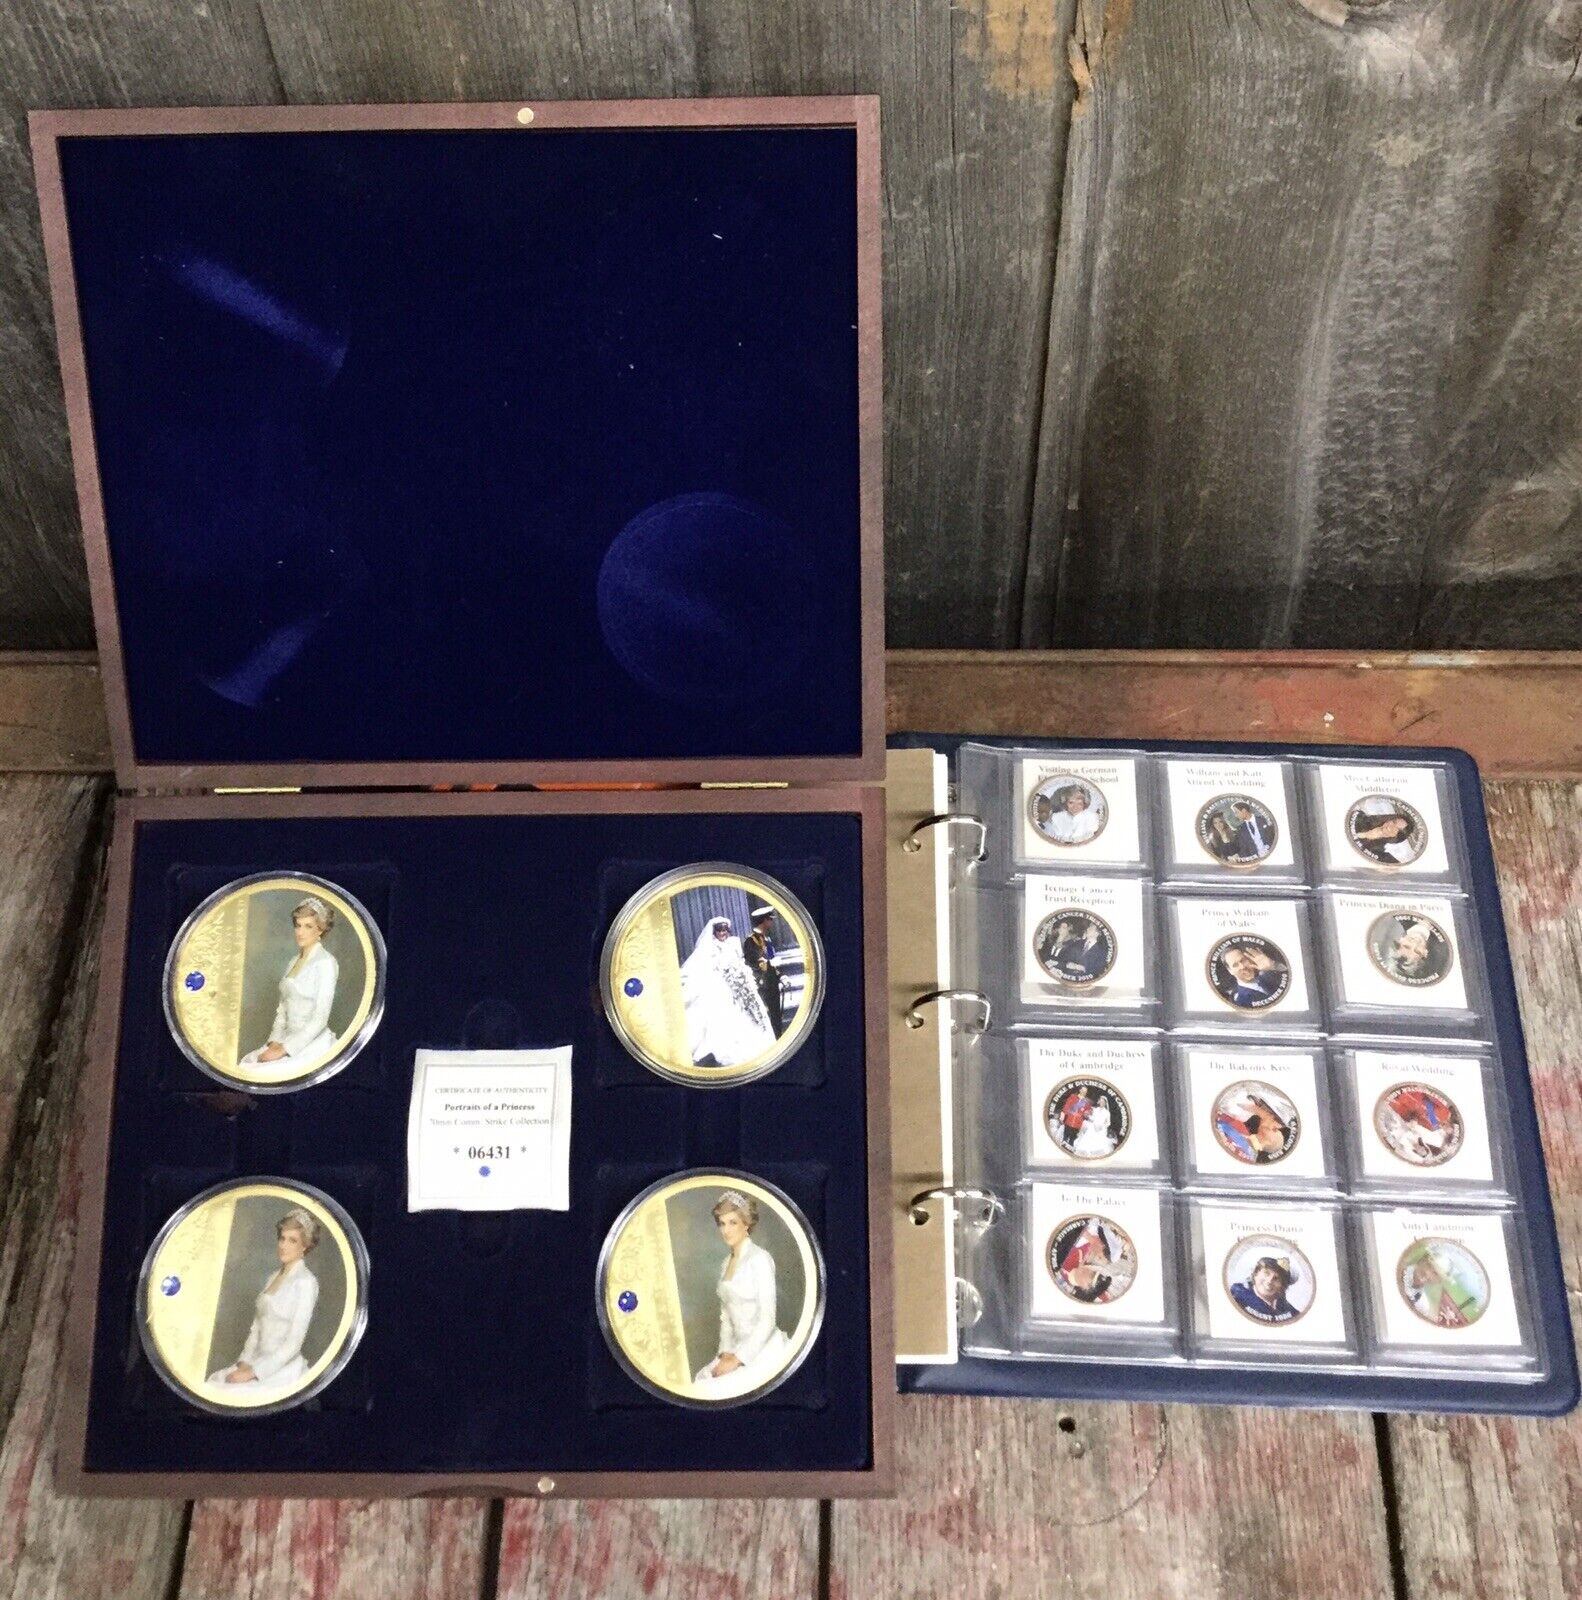 Vintage Princess Diana Royal Family 70mm Comm Strike Coin Collection 06431 LOT